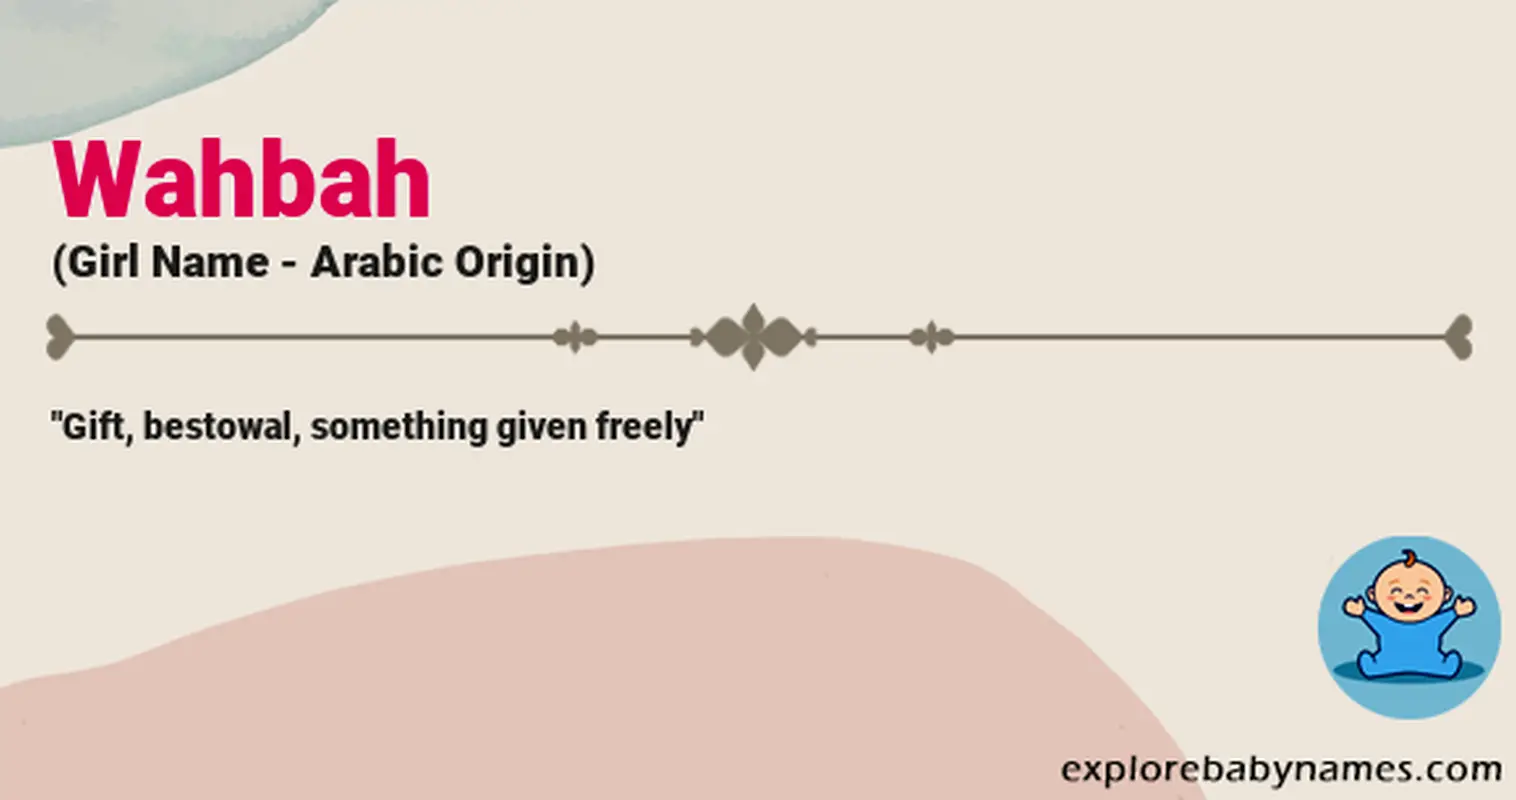 Meaning of Wahbah